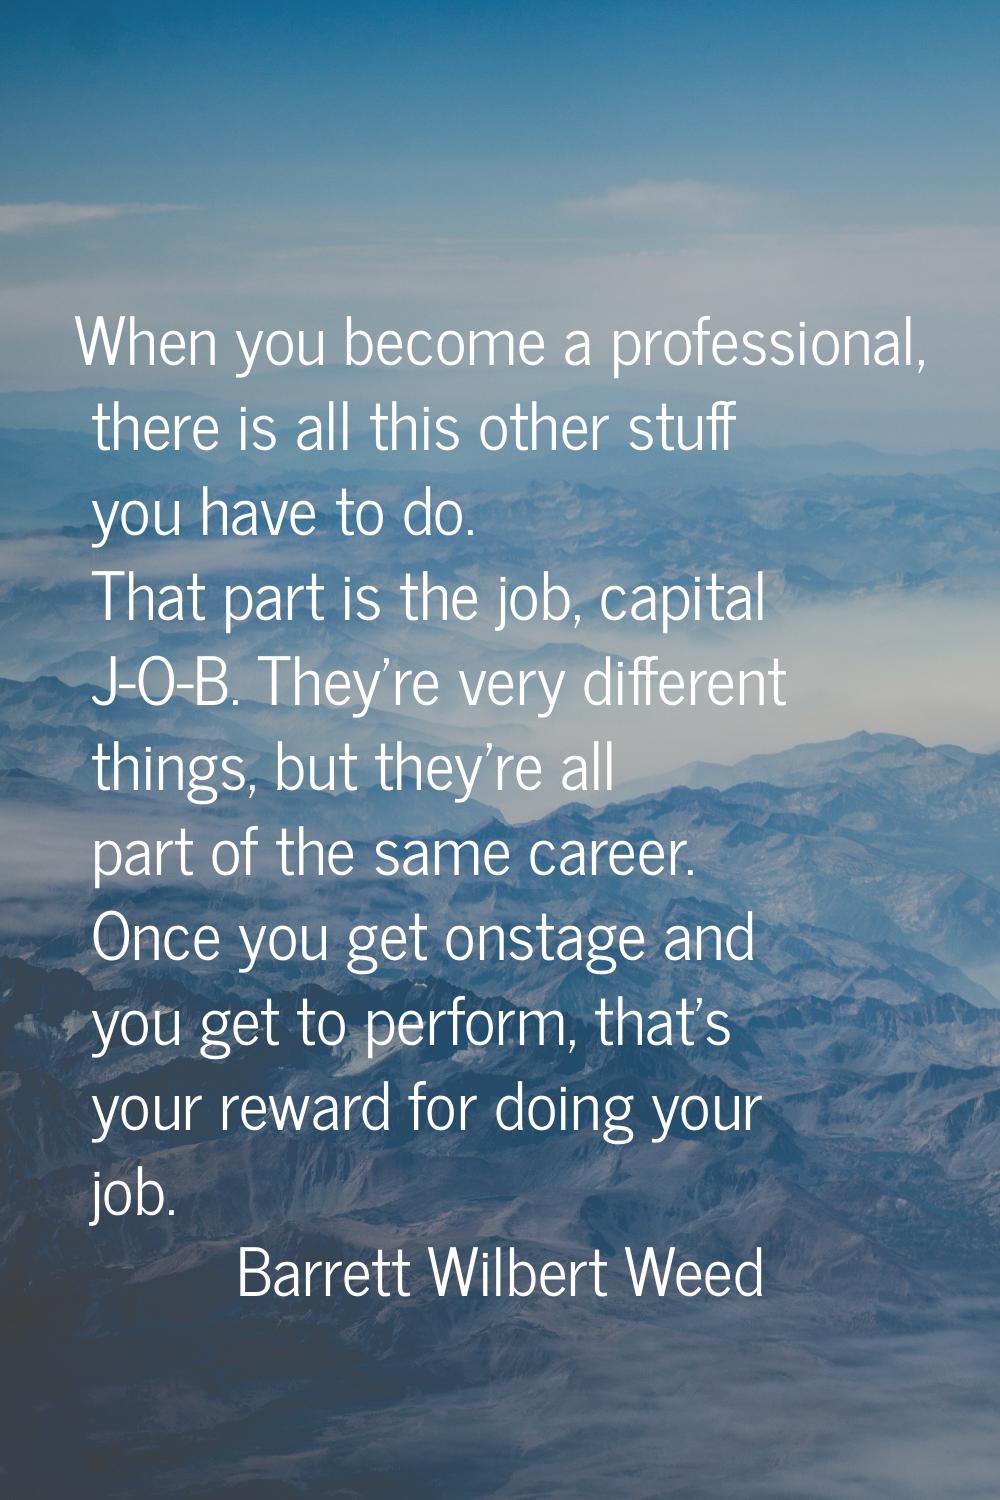 When you become a professional, there is all this other stuff you have to do. That part is the job,